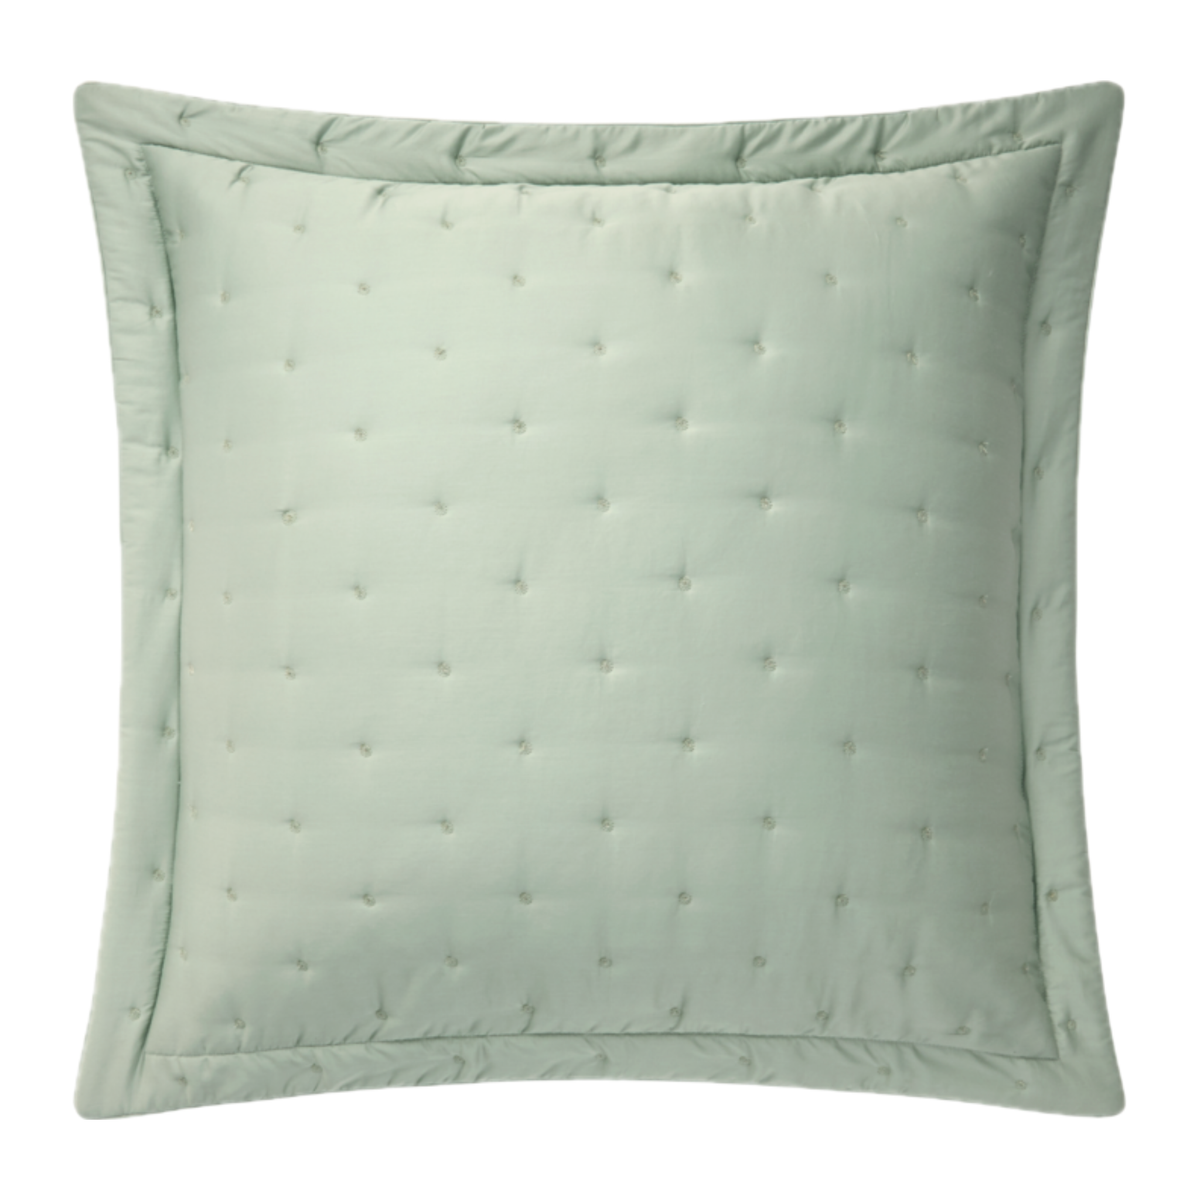 Euro Sham of Yves Delorme Triomphe Quilted Bedding in Veronese Color